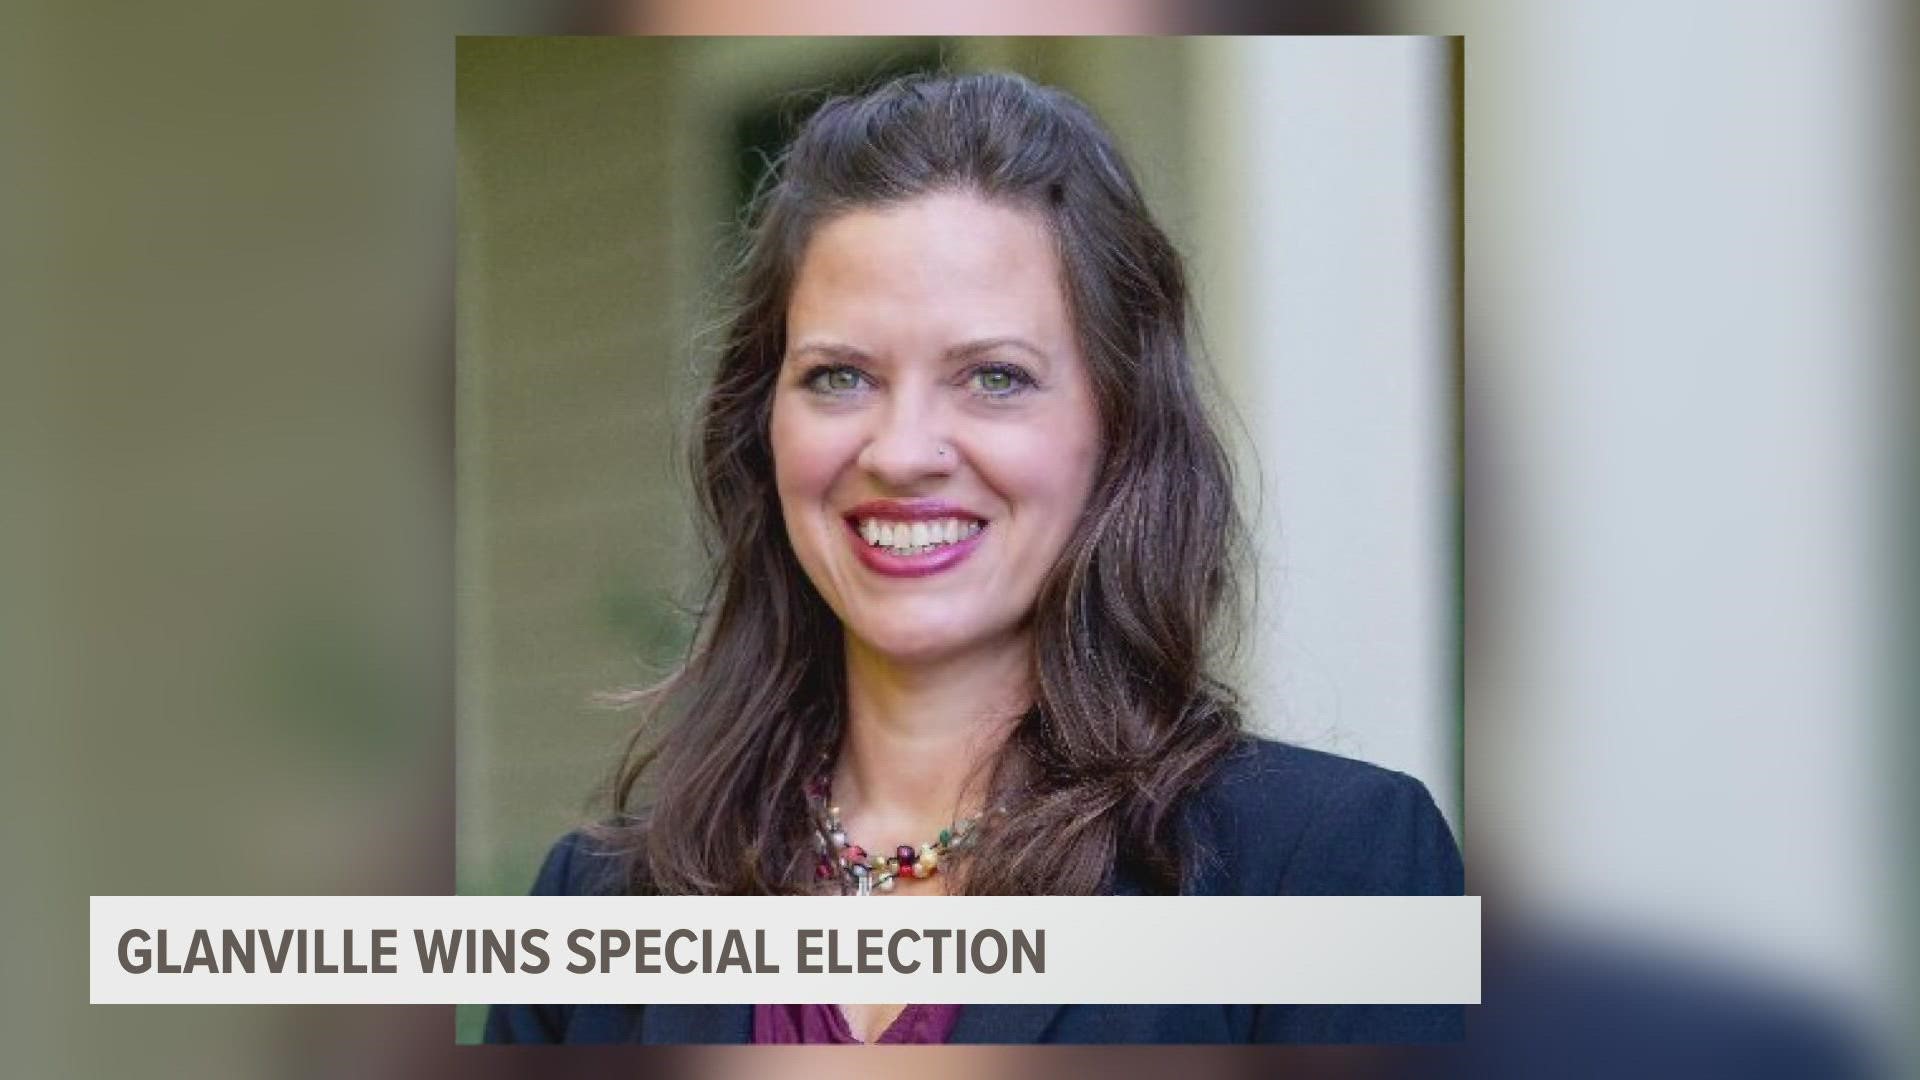 Glanville, a Democrat, defeated Republican Robert Regan Tuesday night in a special election for the vacant 74th Michigan House District seat.